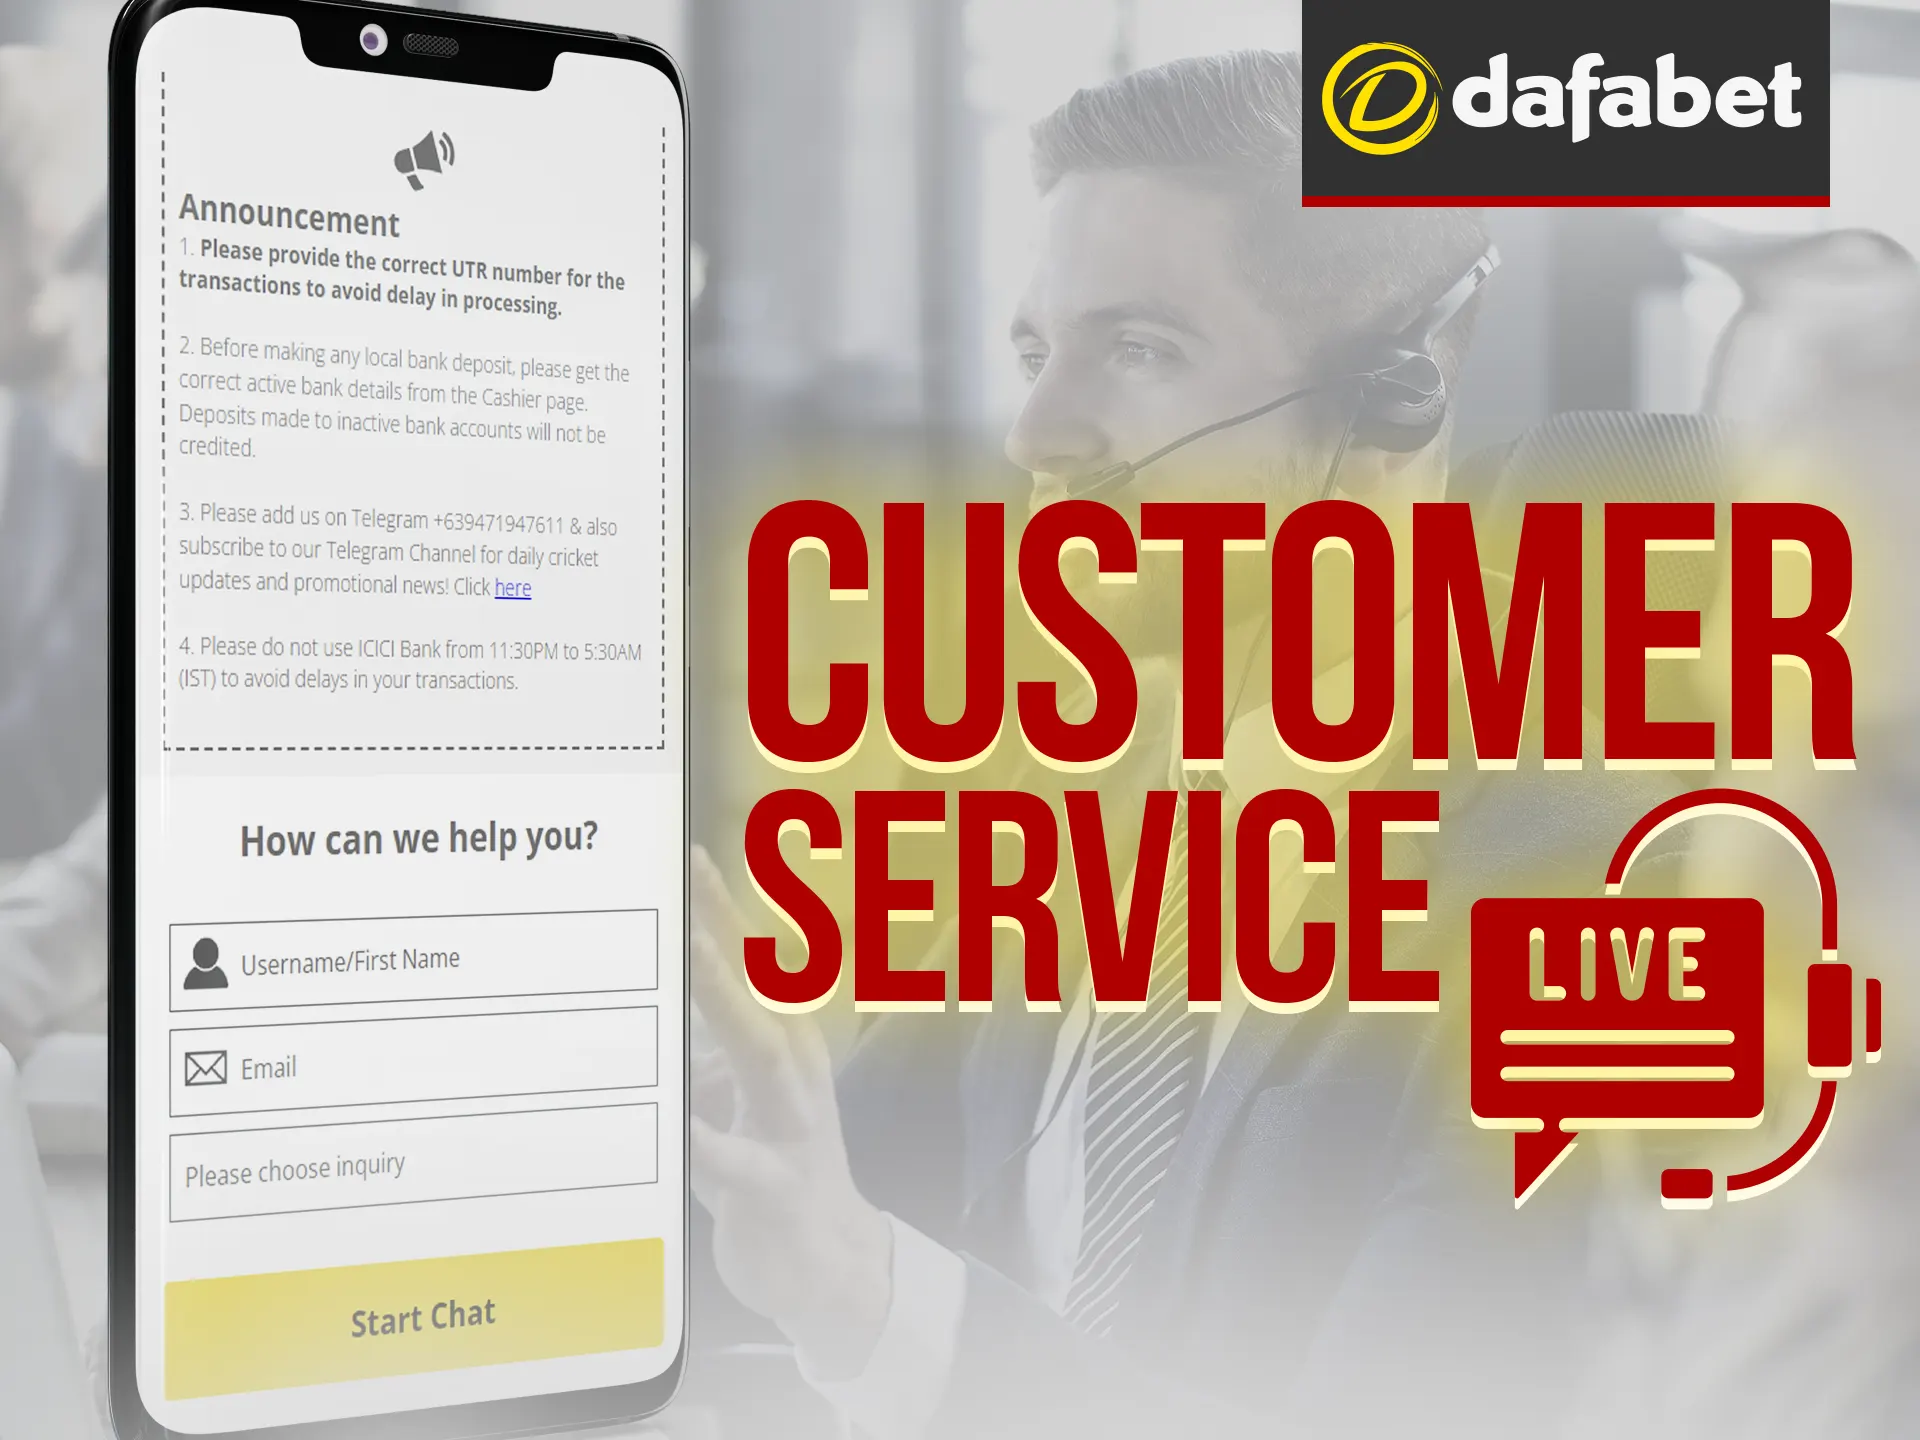 Dafabet's customer support, available 24/7, offers assistance via live chat, email, and hotline.